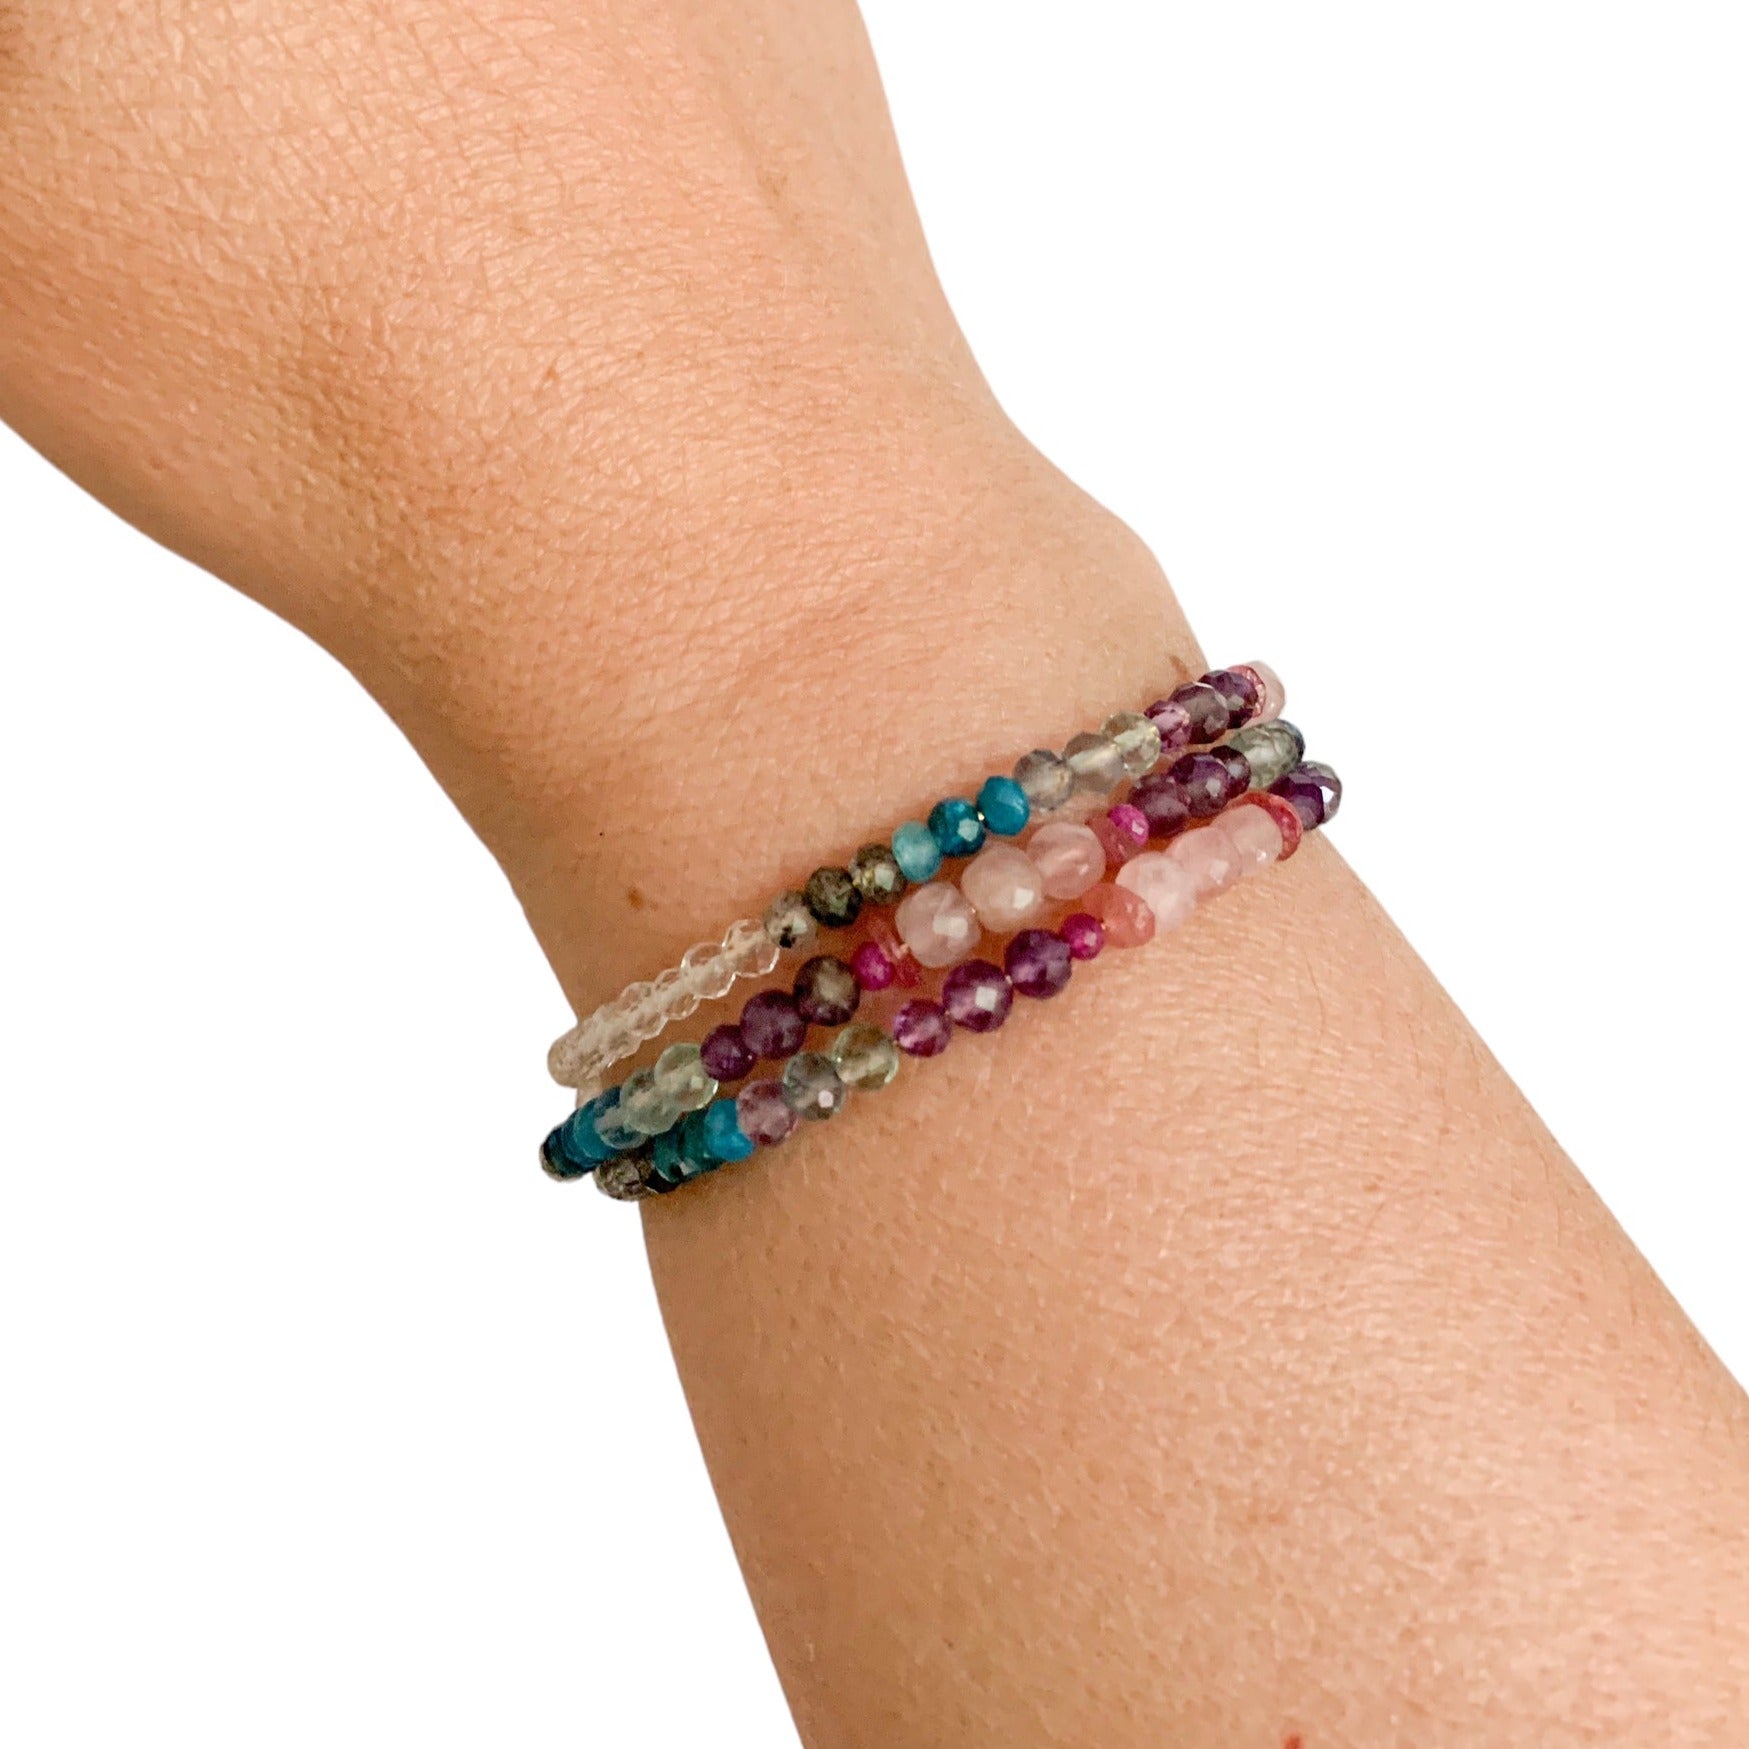 Serenity Wrap Crystal Bracelet as a daily reminder of self-care